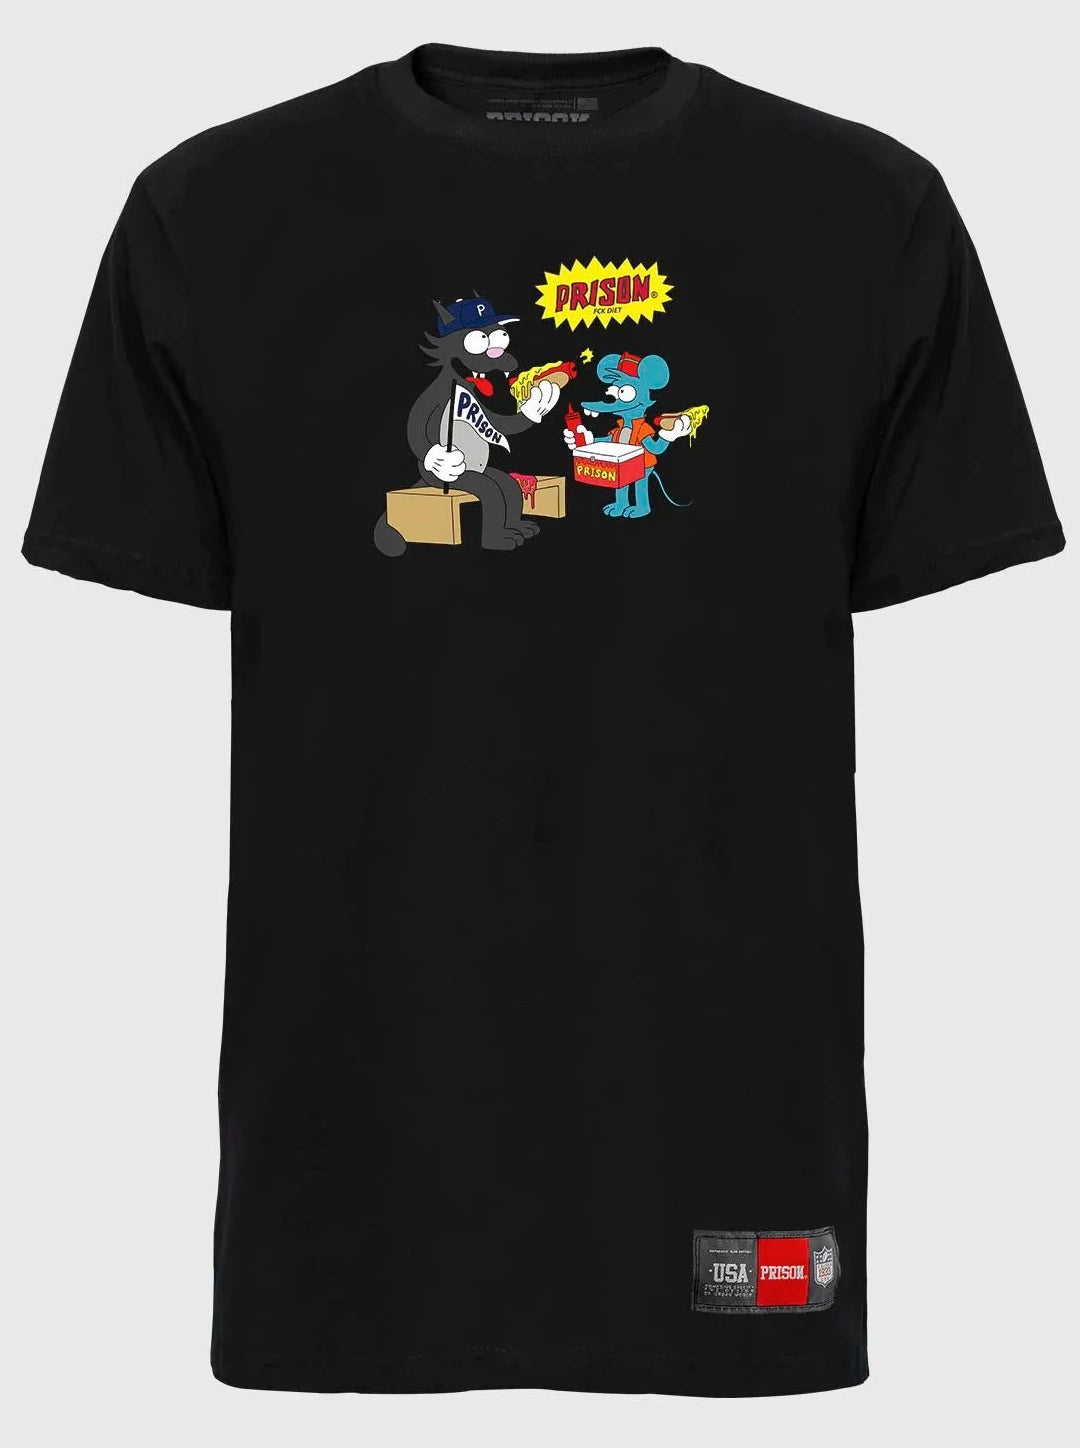 Camiseta Prison Black The Itchy & Scratchy (8007224656088)